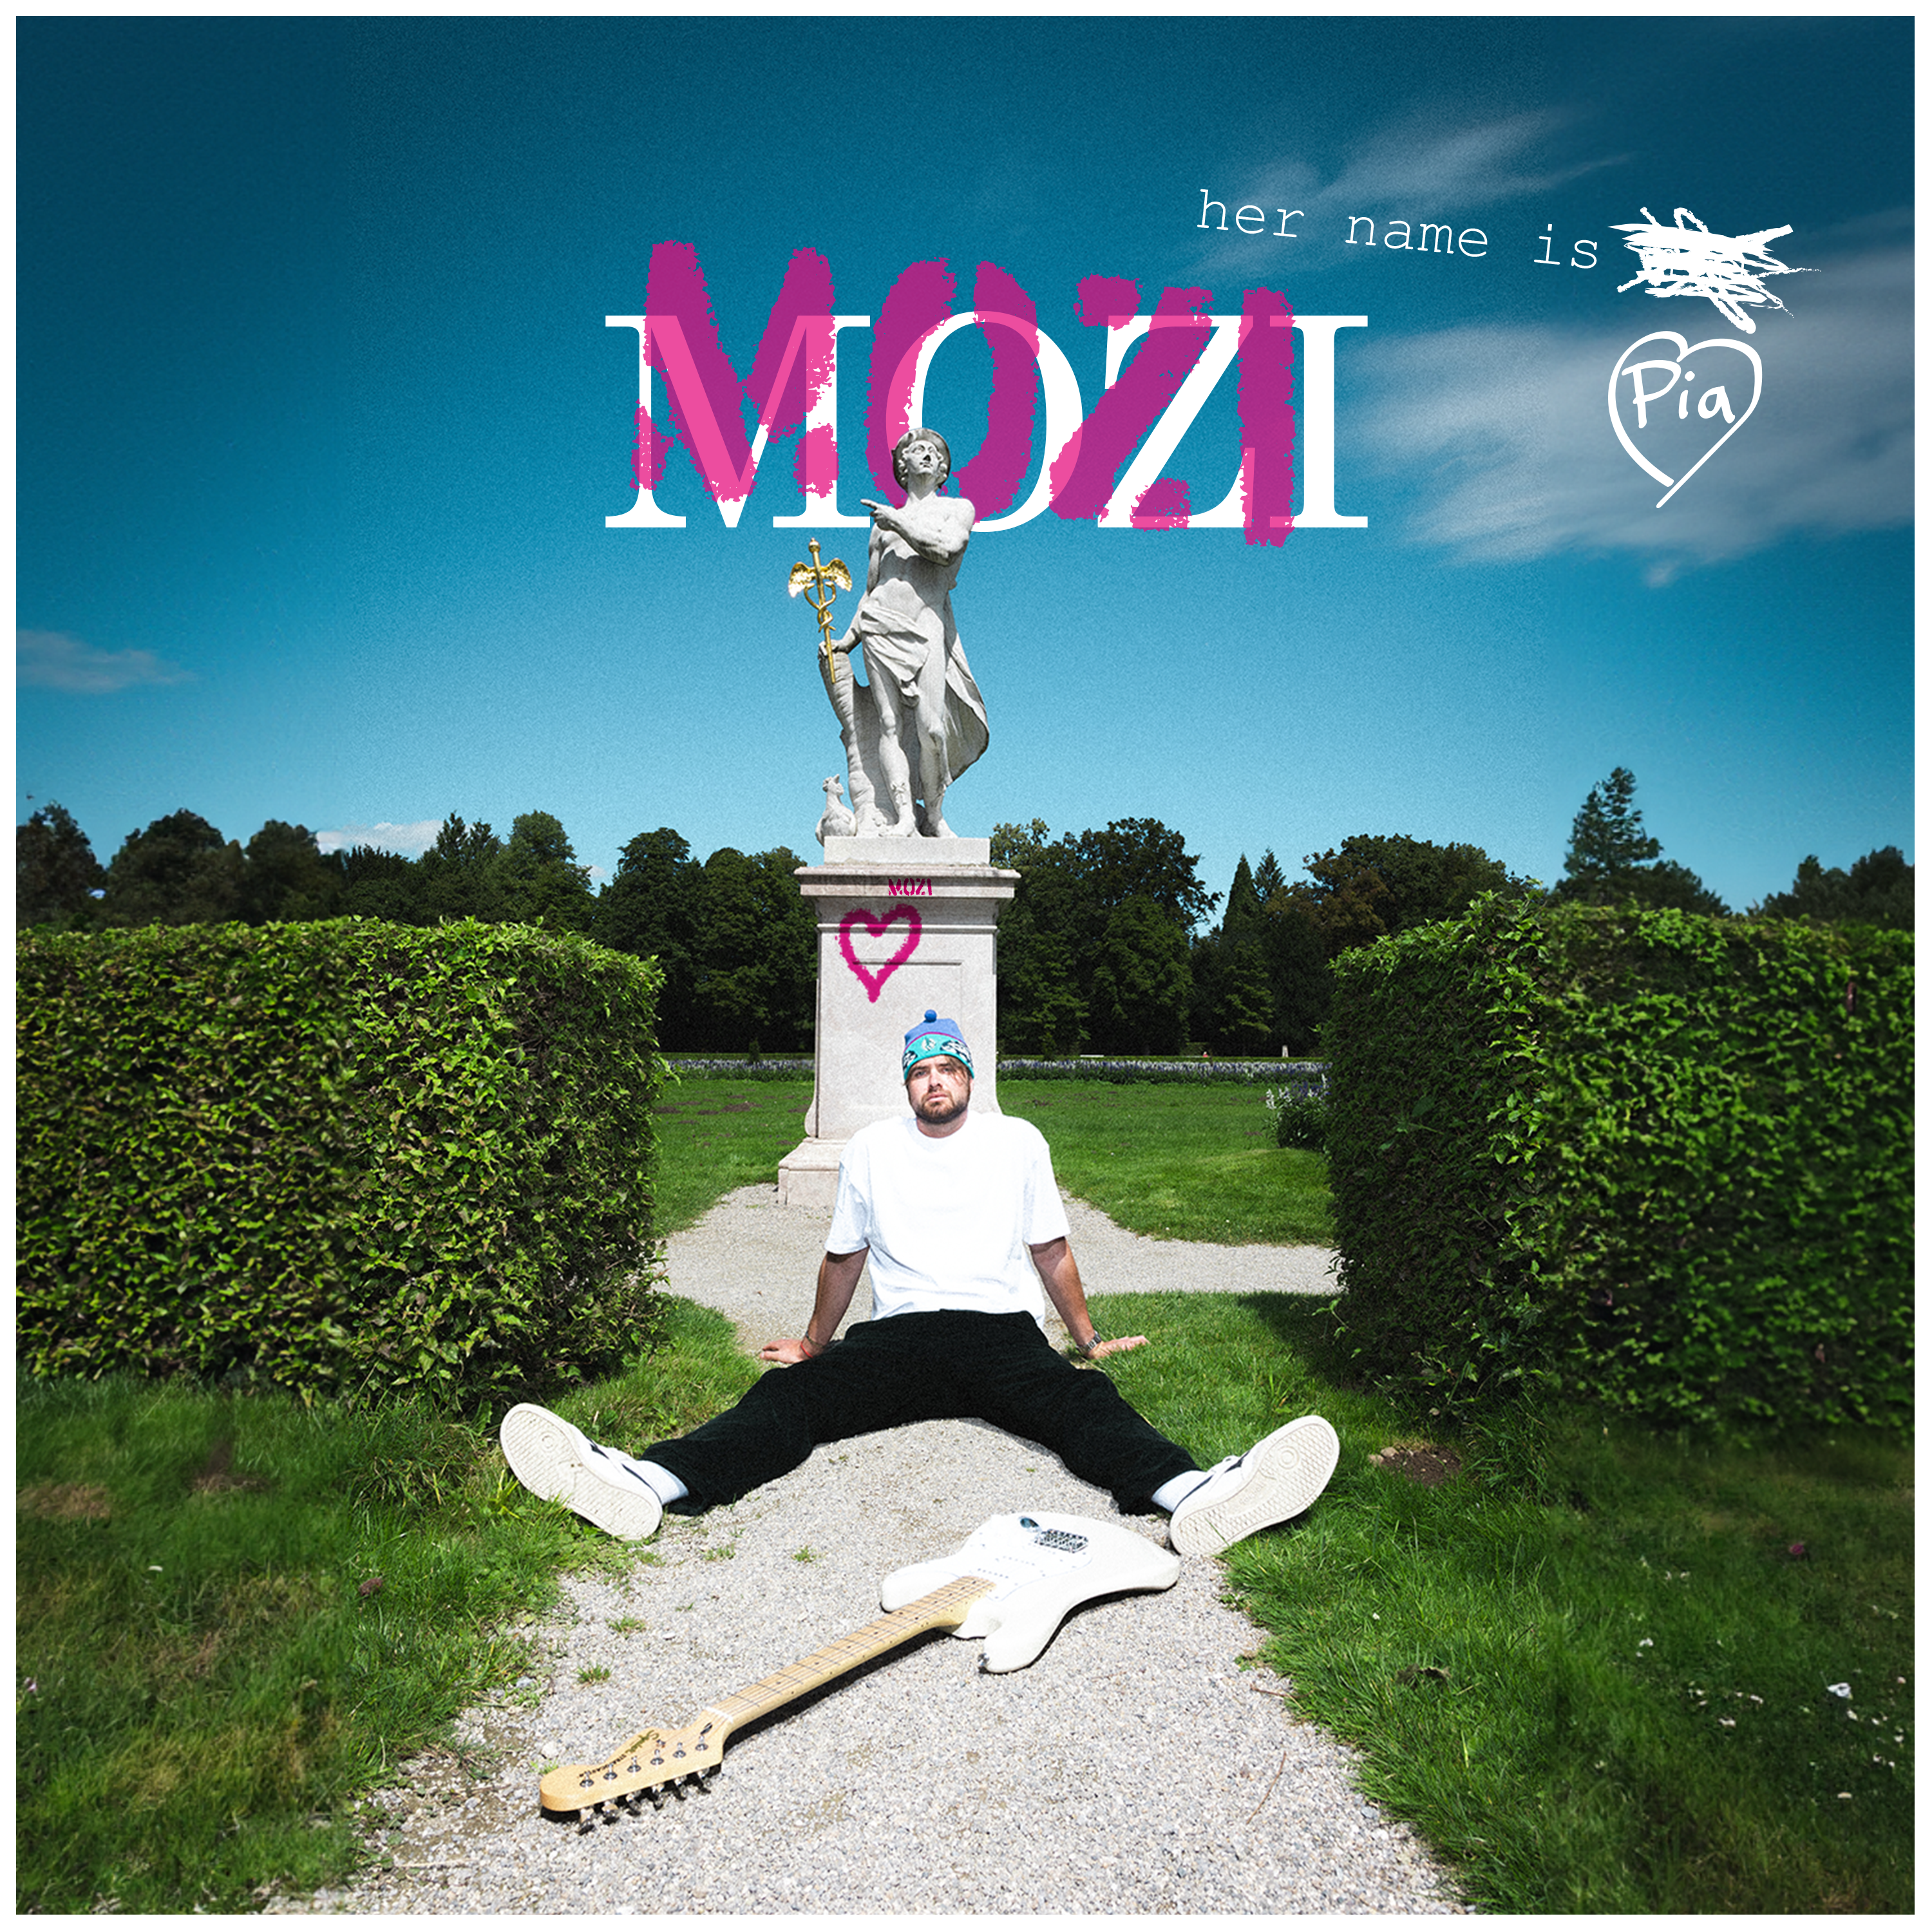 MOZI Single Cover in front of Statue for his Single: Her Name is PIA